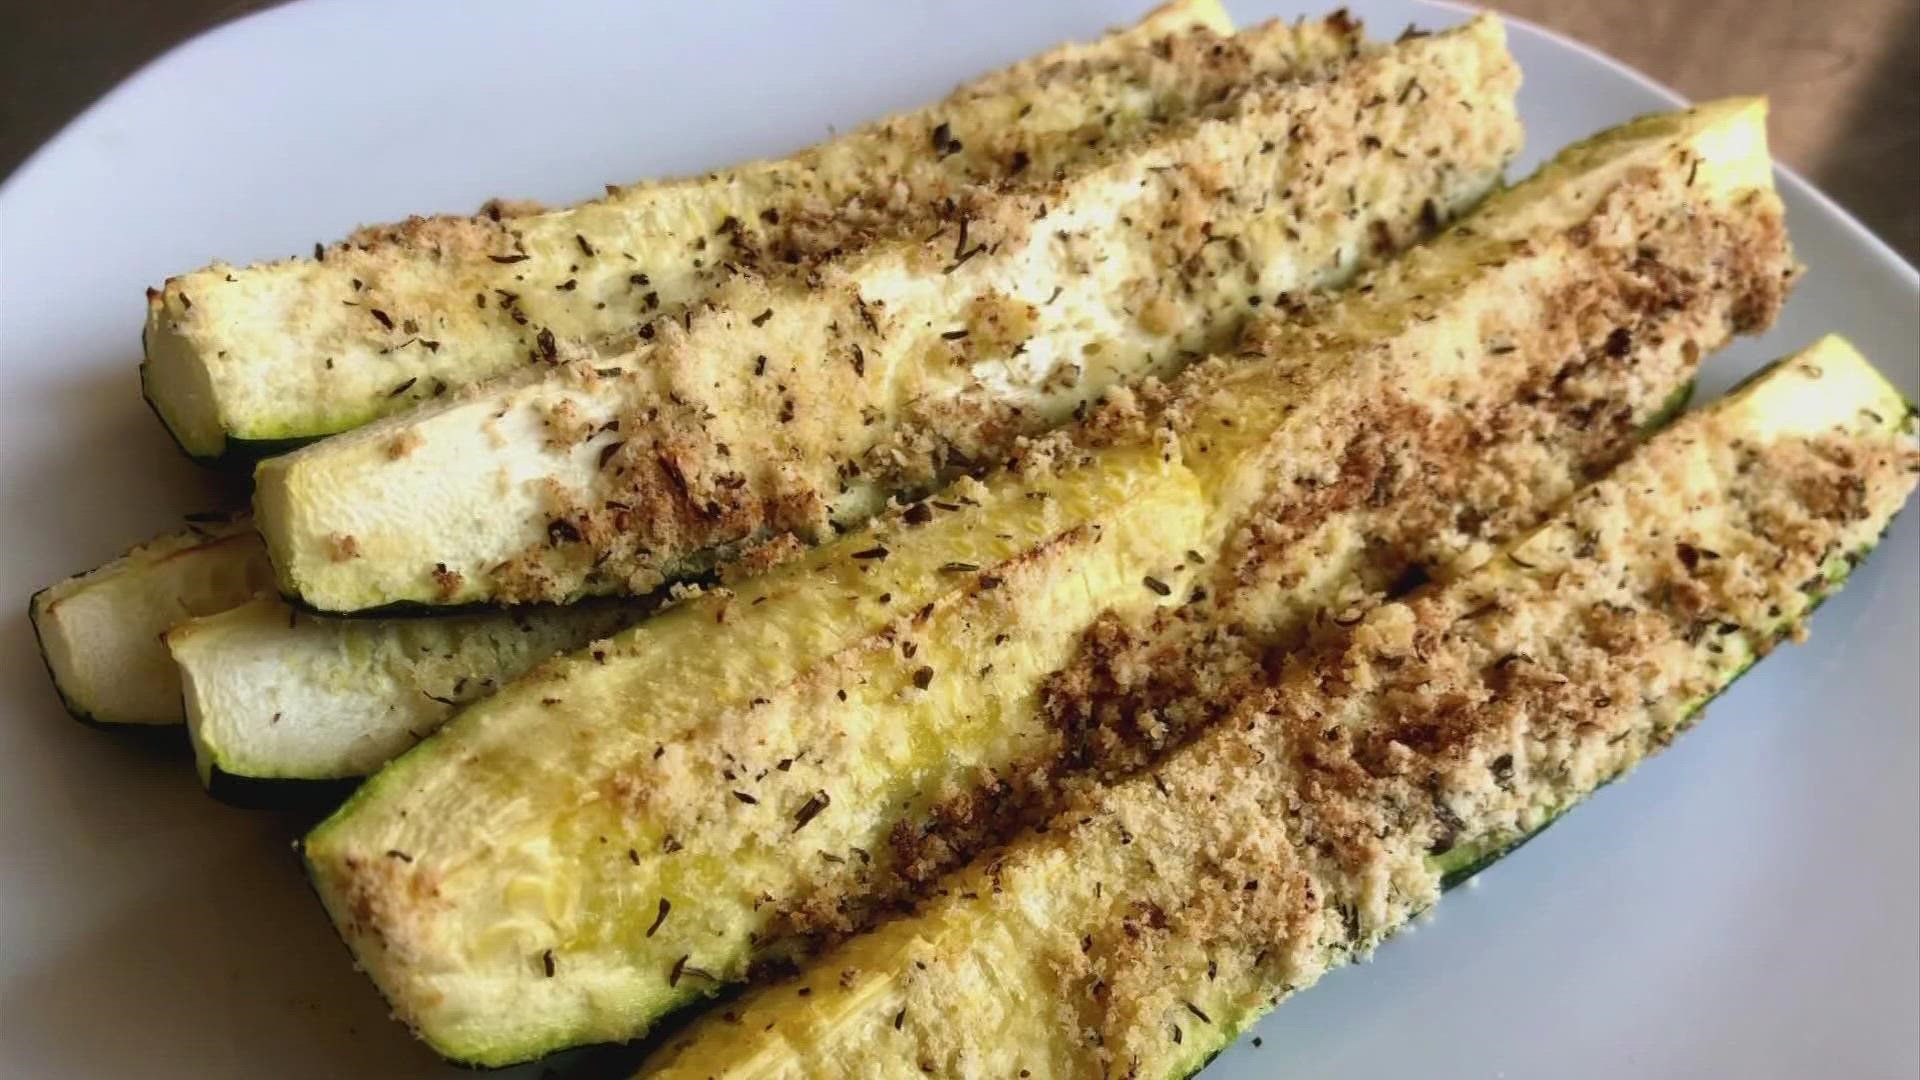 Don't like vegetables? Here's a recipe that takes on a new spin for zucchini.